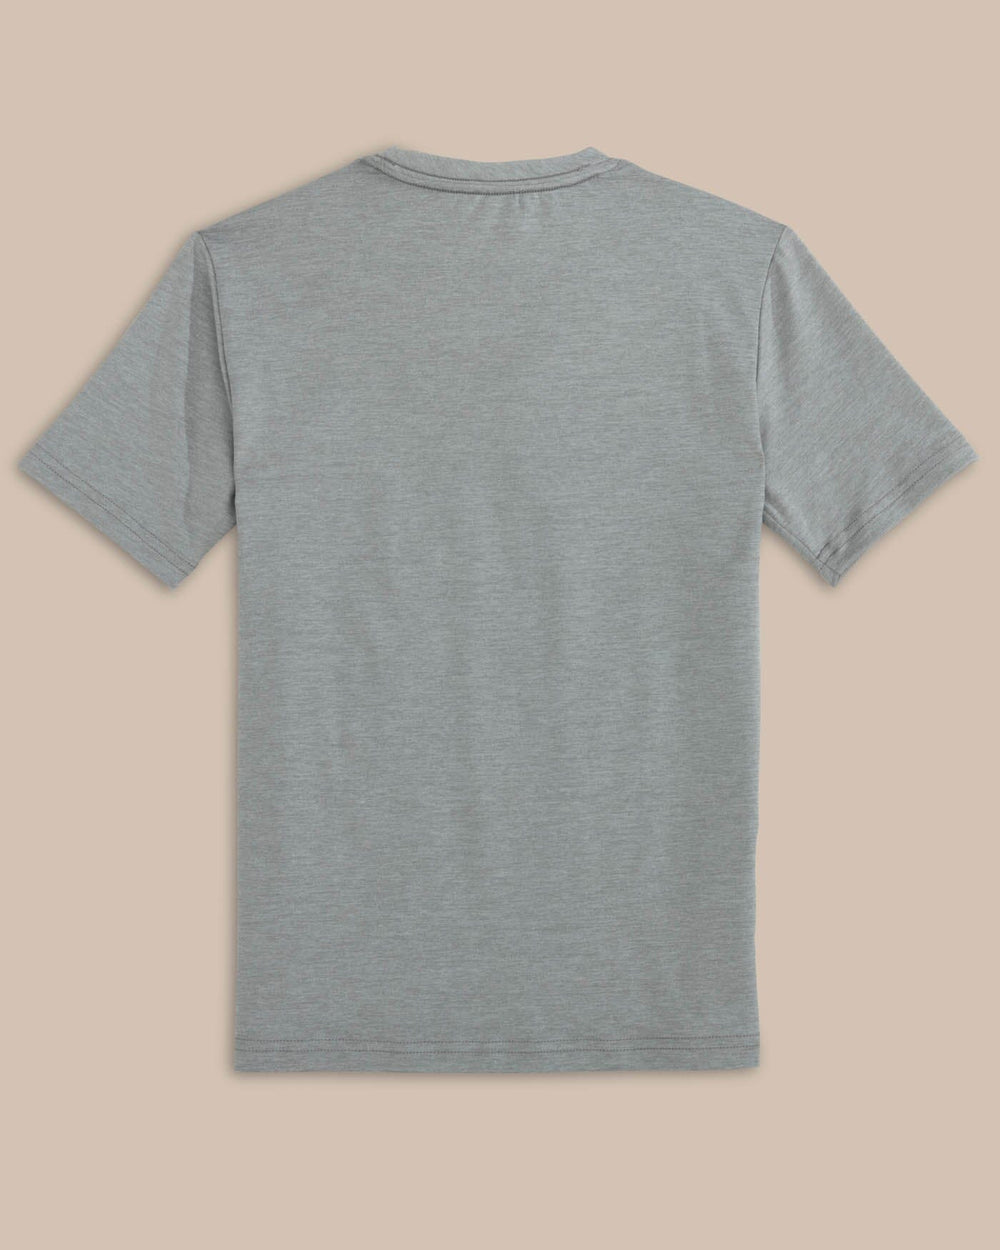 The back view of the Southern Tide Kids ST Tri Block Heather Short Sleeve Performance T-shirt by Southern Tide - Heather Platinum Grey